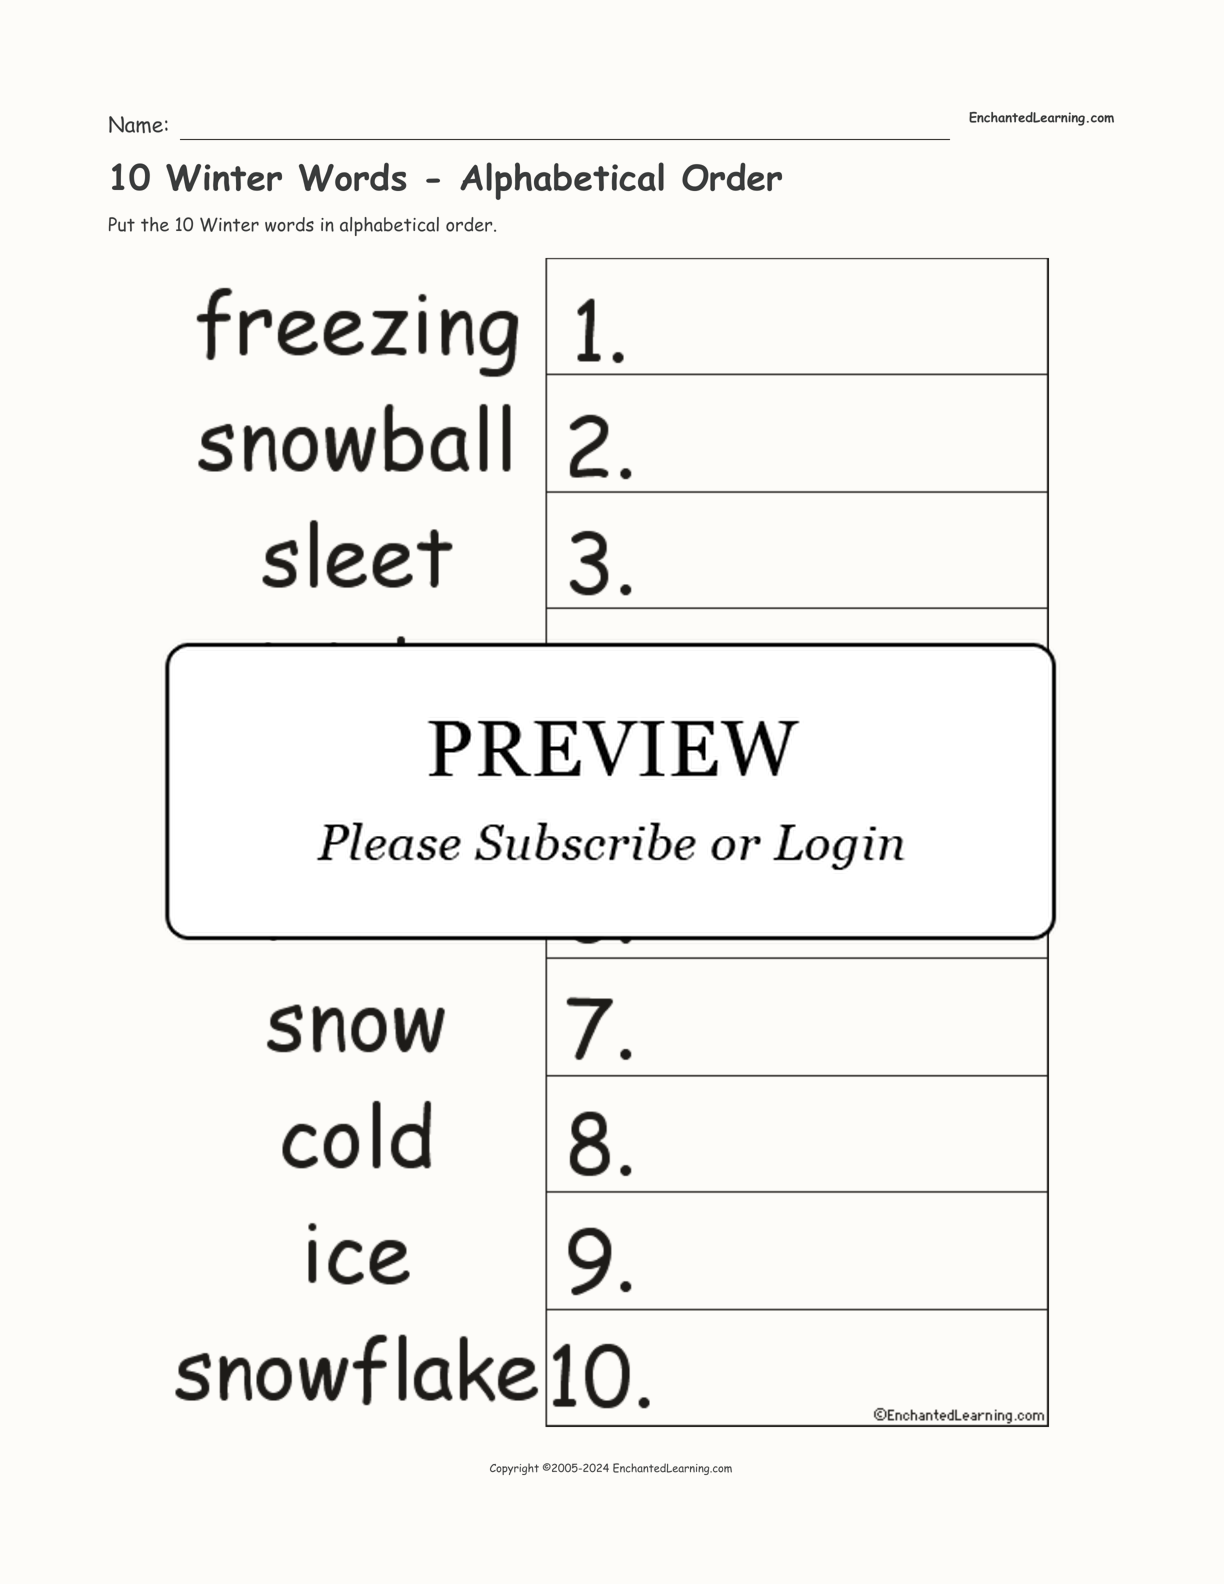 10 Winter Words - Alphabetical Order interactive worksheet page 1